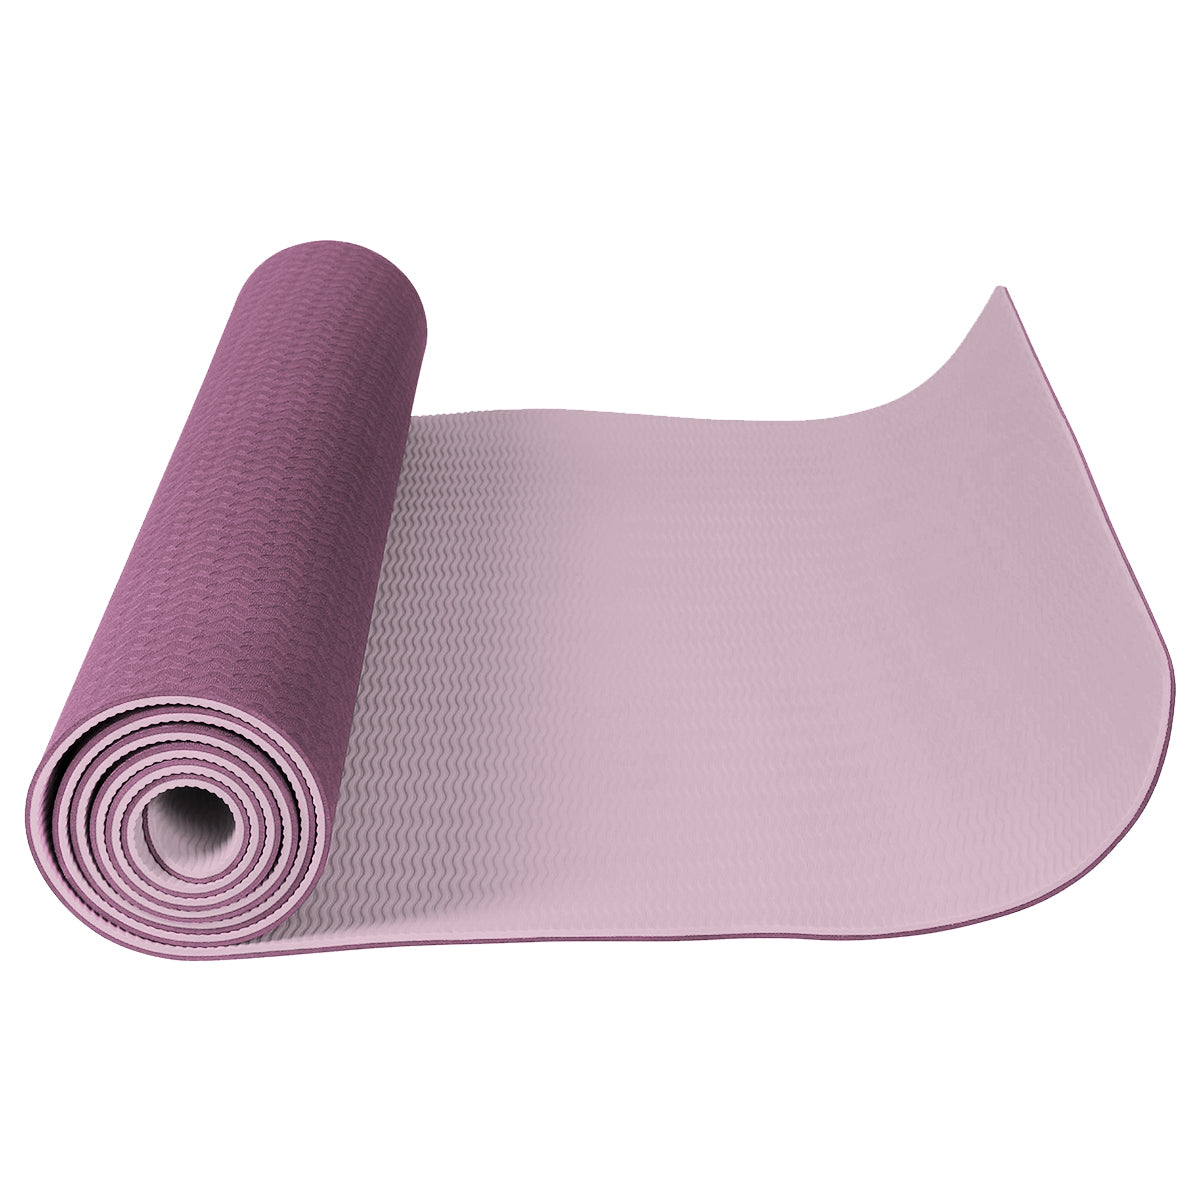 Extra Thick Yoga Mat - 0.5-inch-thick Non-slip Foam Workout Mat